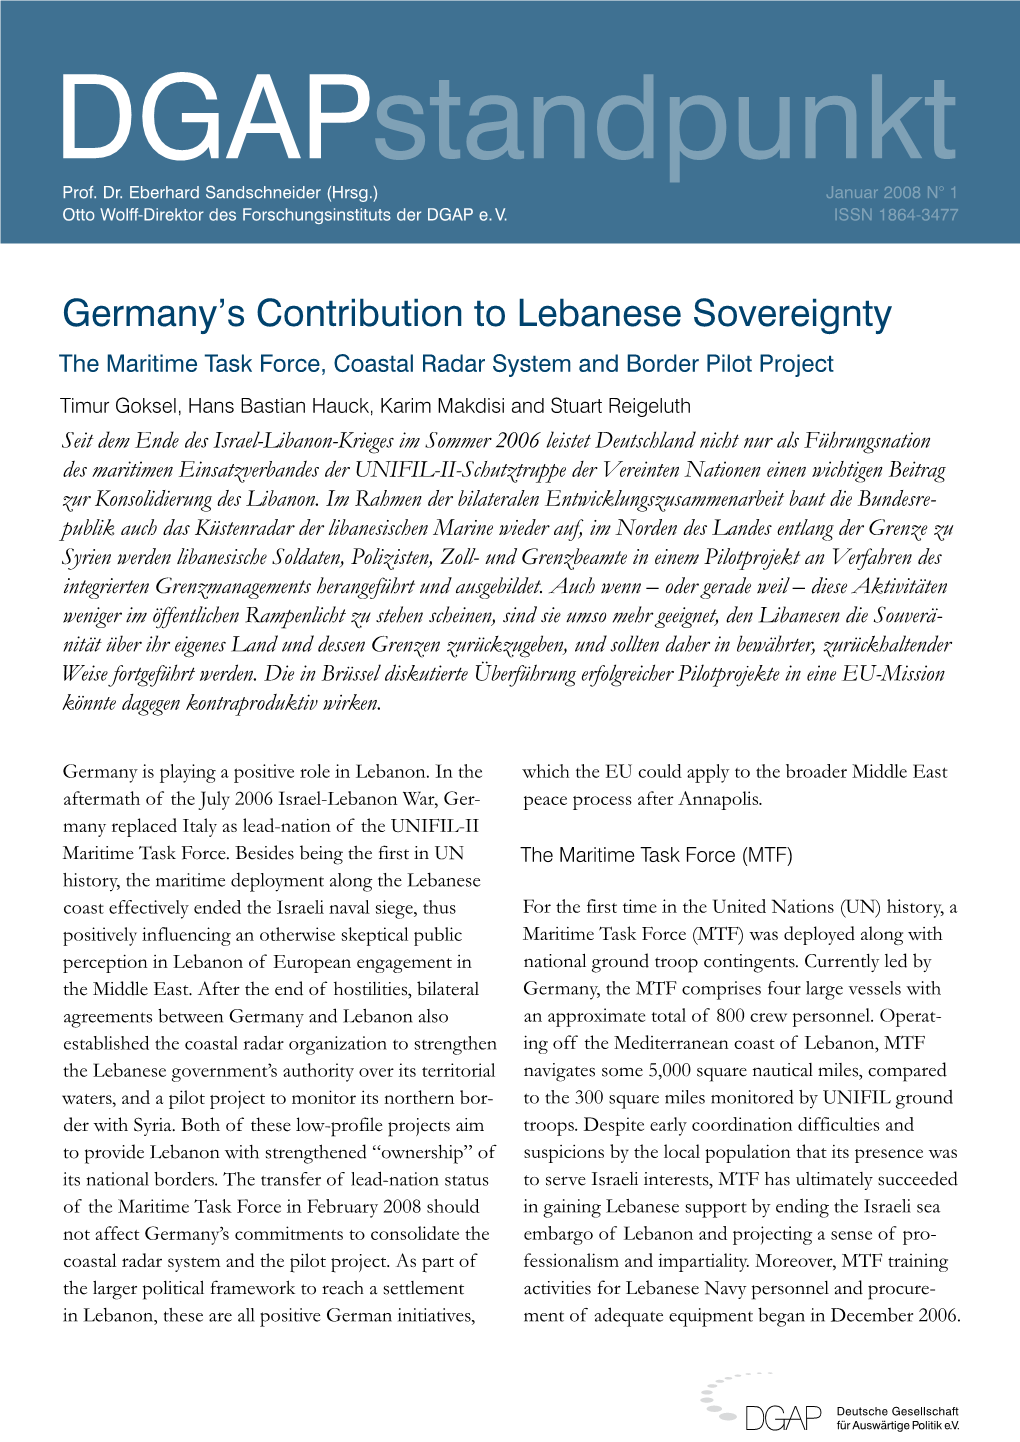 Germany's Contribution to Lebanese Sovereignty